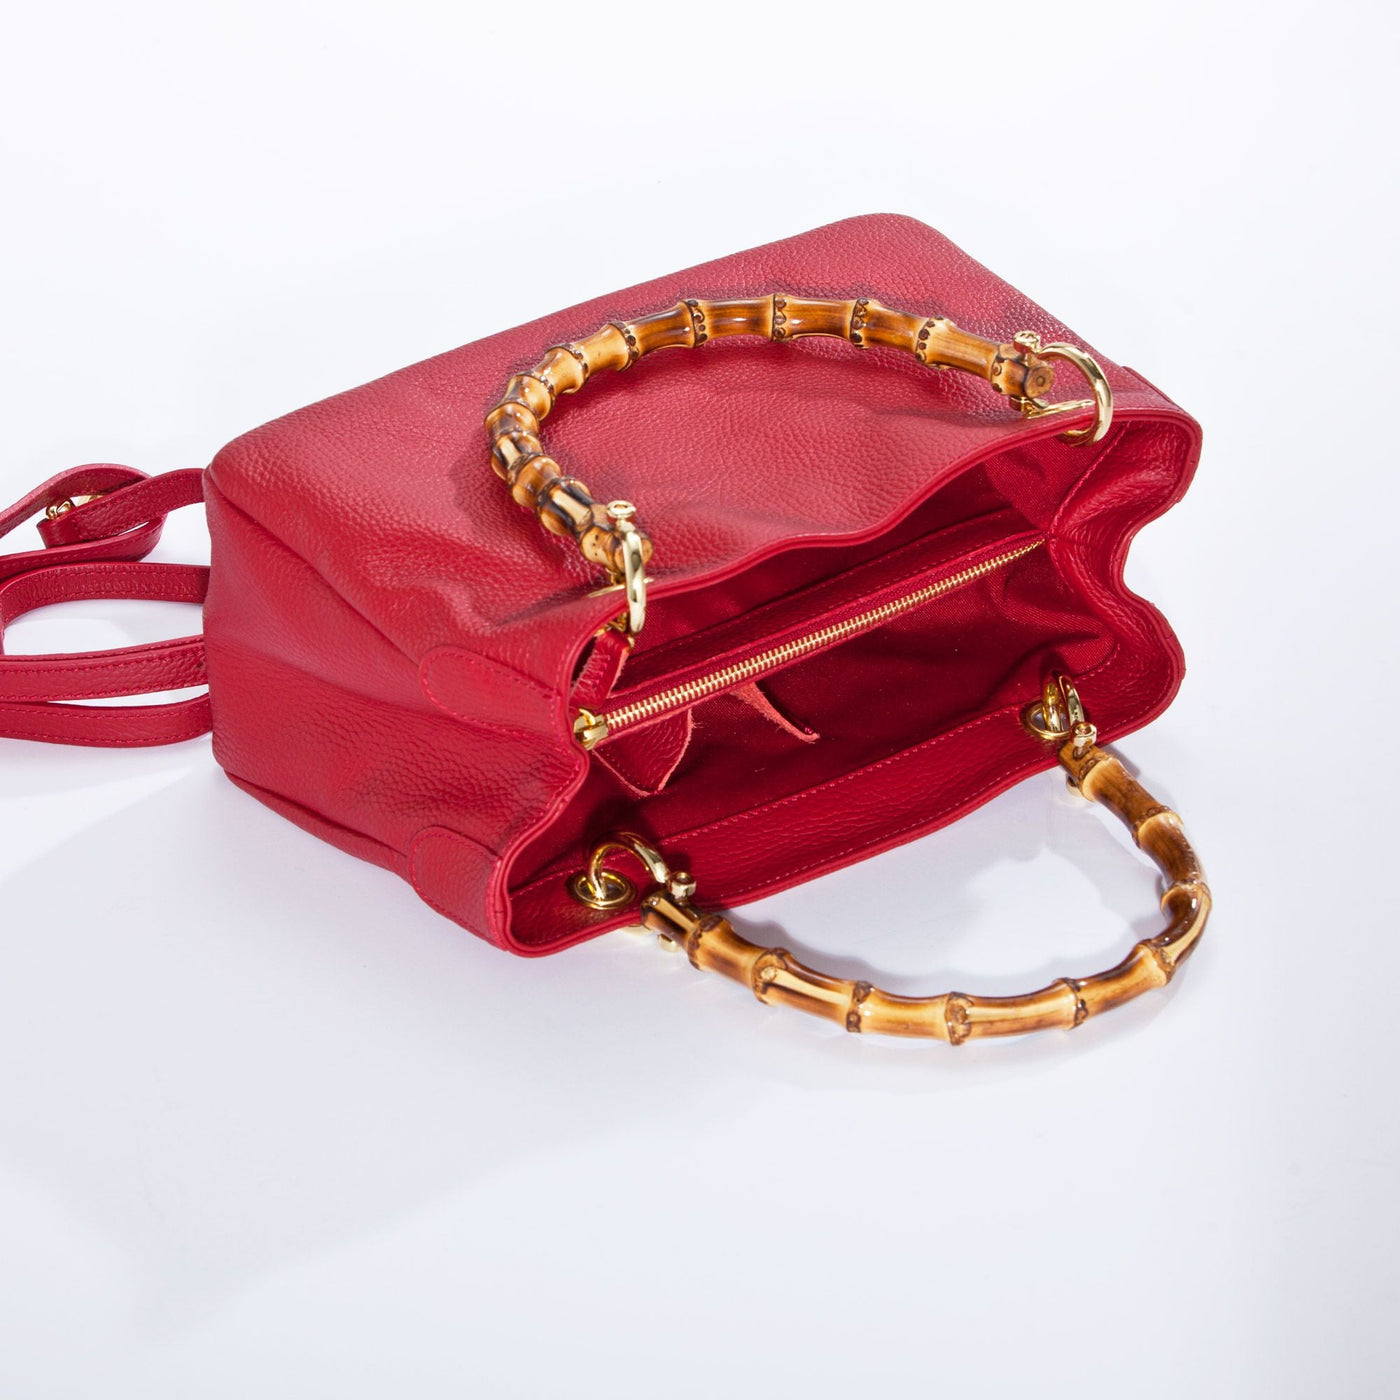 Florentine Leather Red Handbag With Bamboo Handles